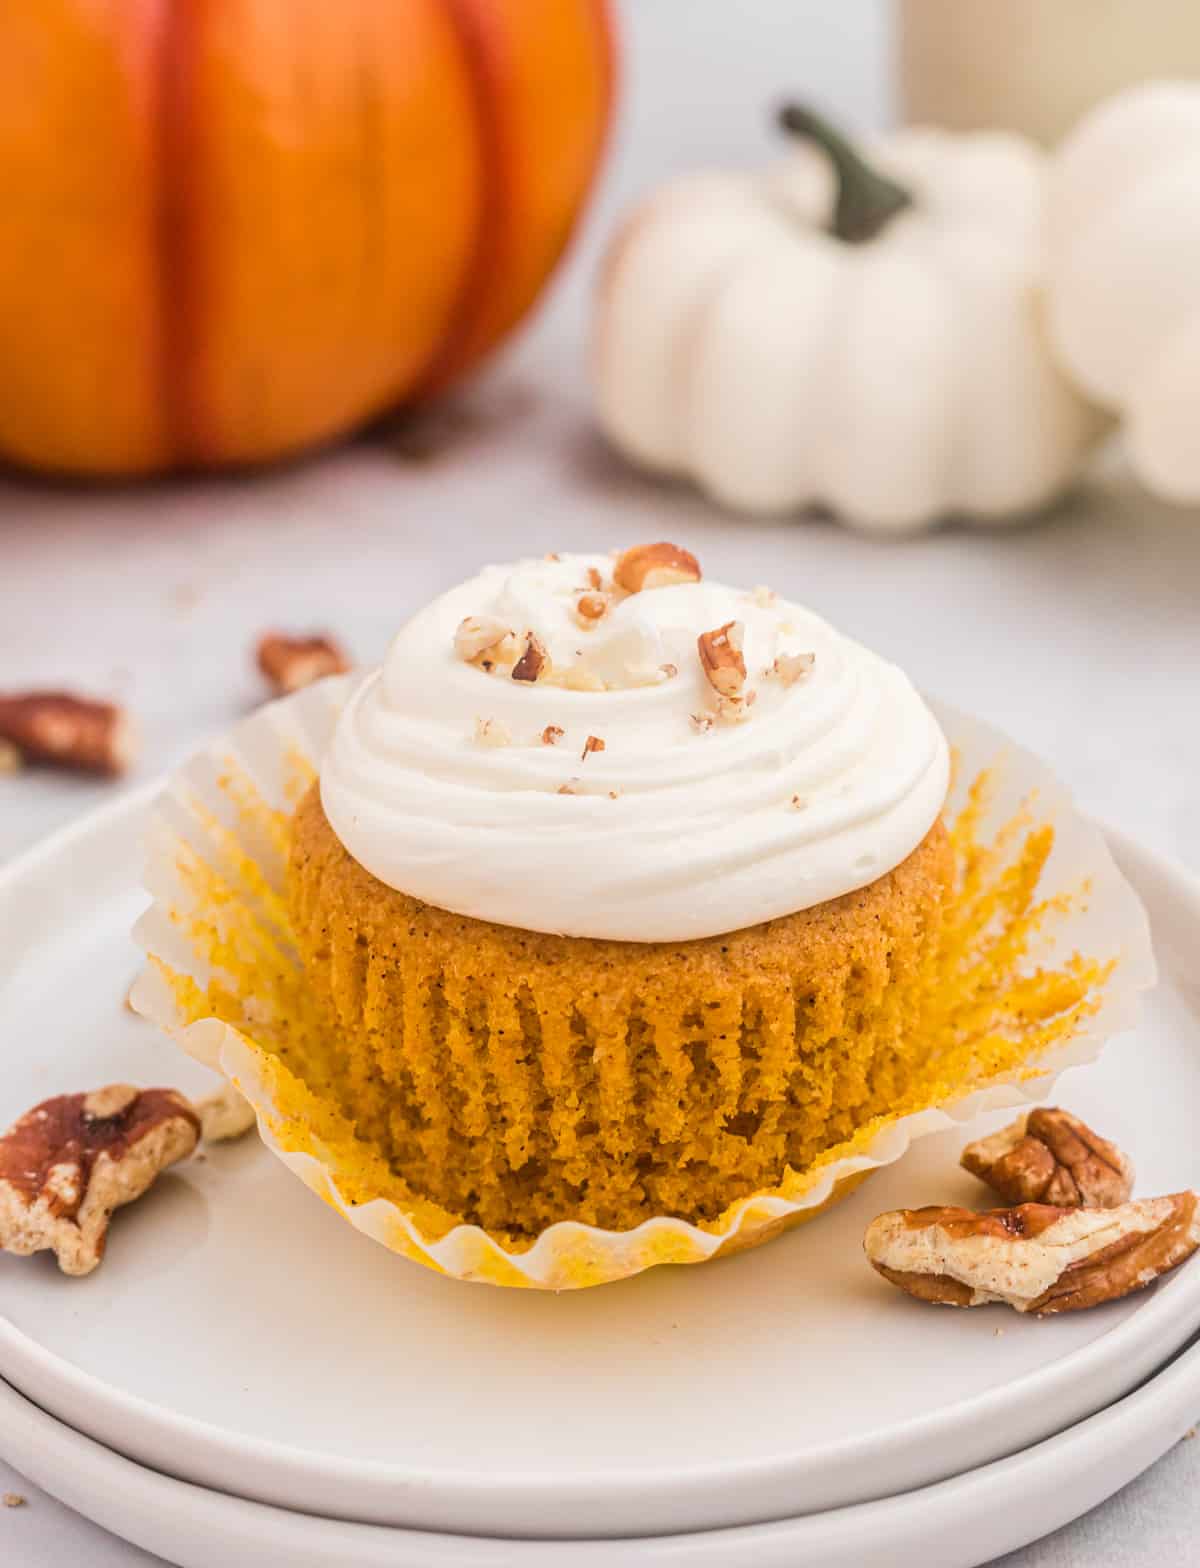 One of the Pumpkin Cupcakes on white plate with the cupcake liner pulled down showing the full cupcake.